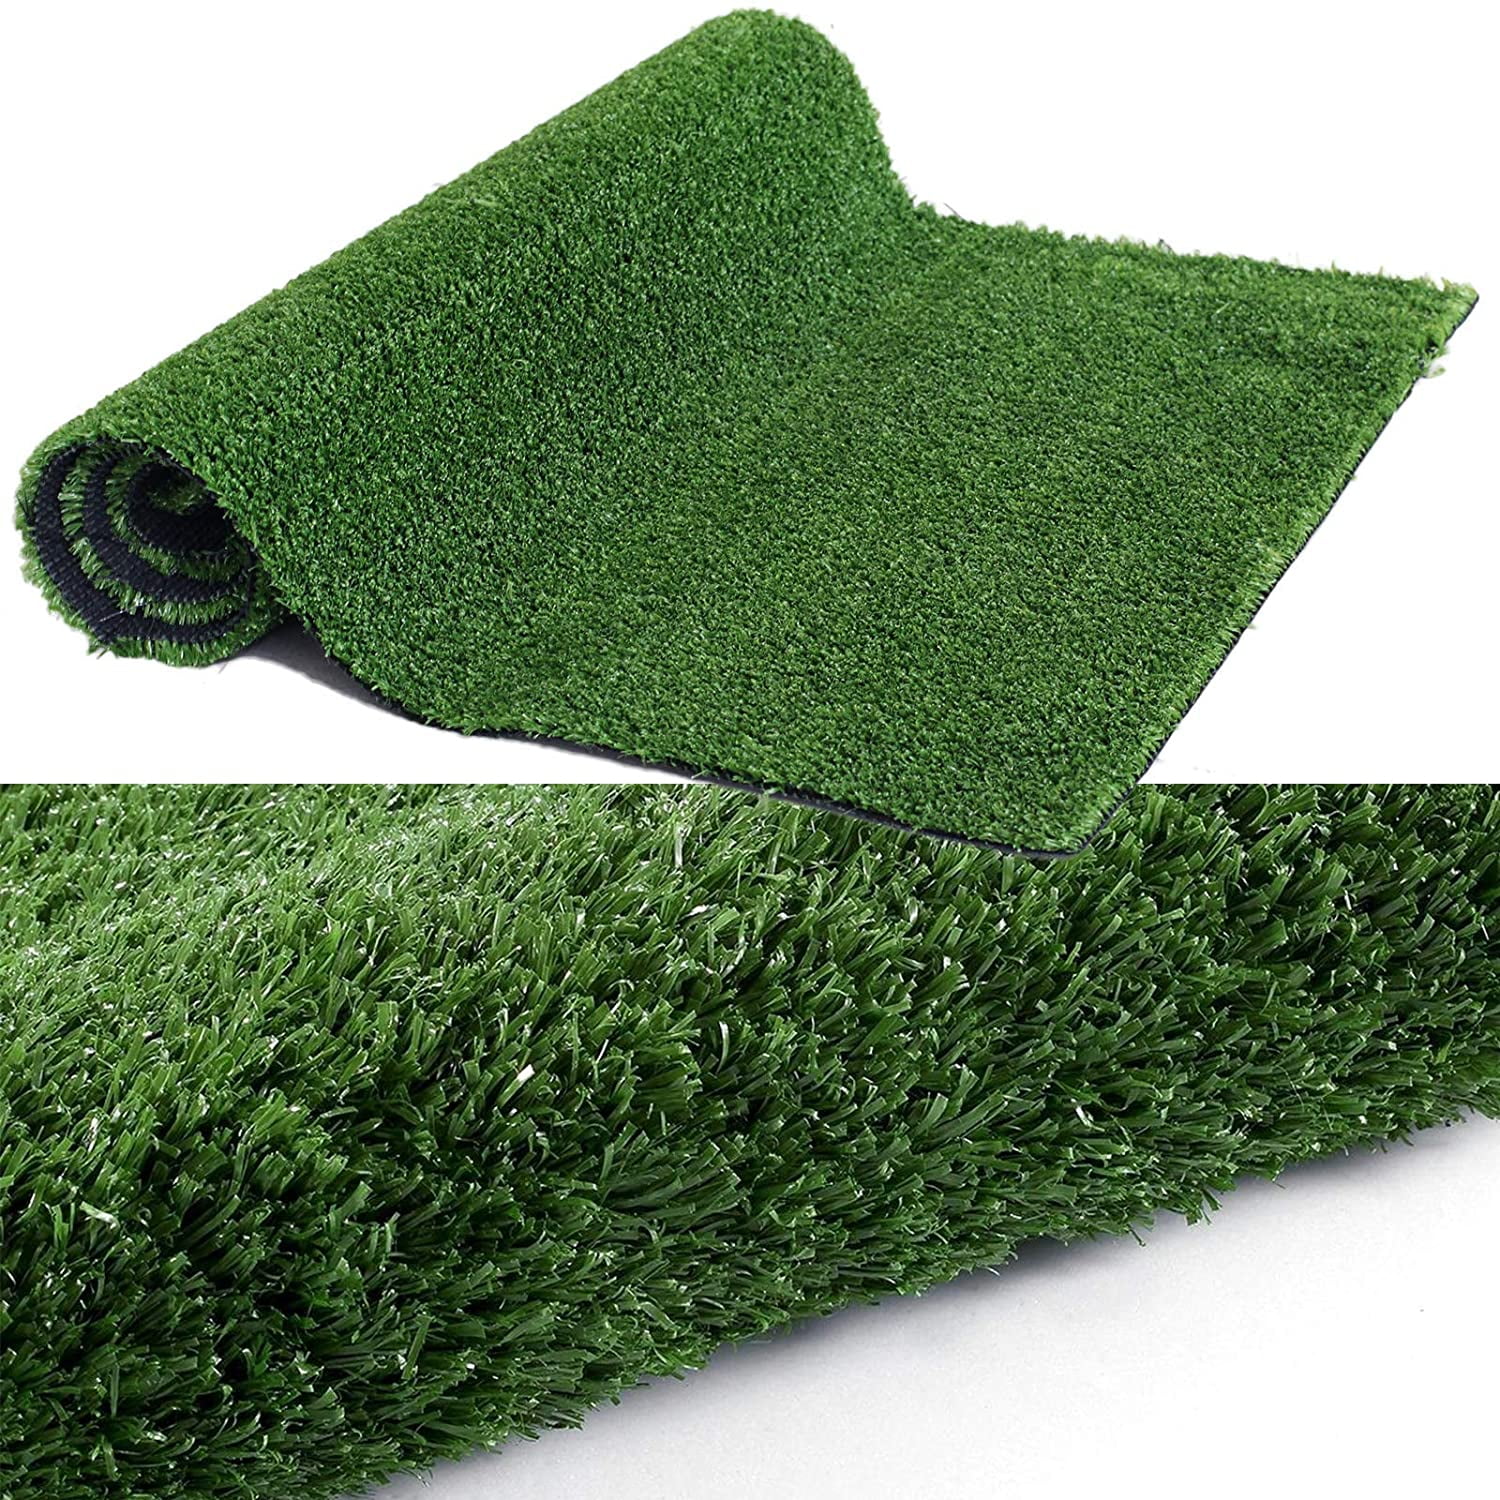 Details about   Artificial Turf Grass Synthetic Mat Rug Fake Lawn Indoor Outdoor Landscape 